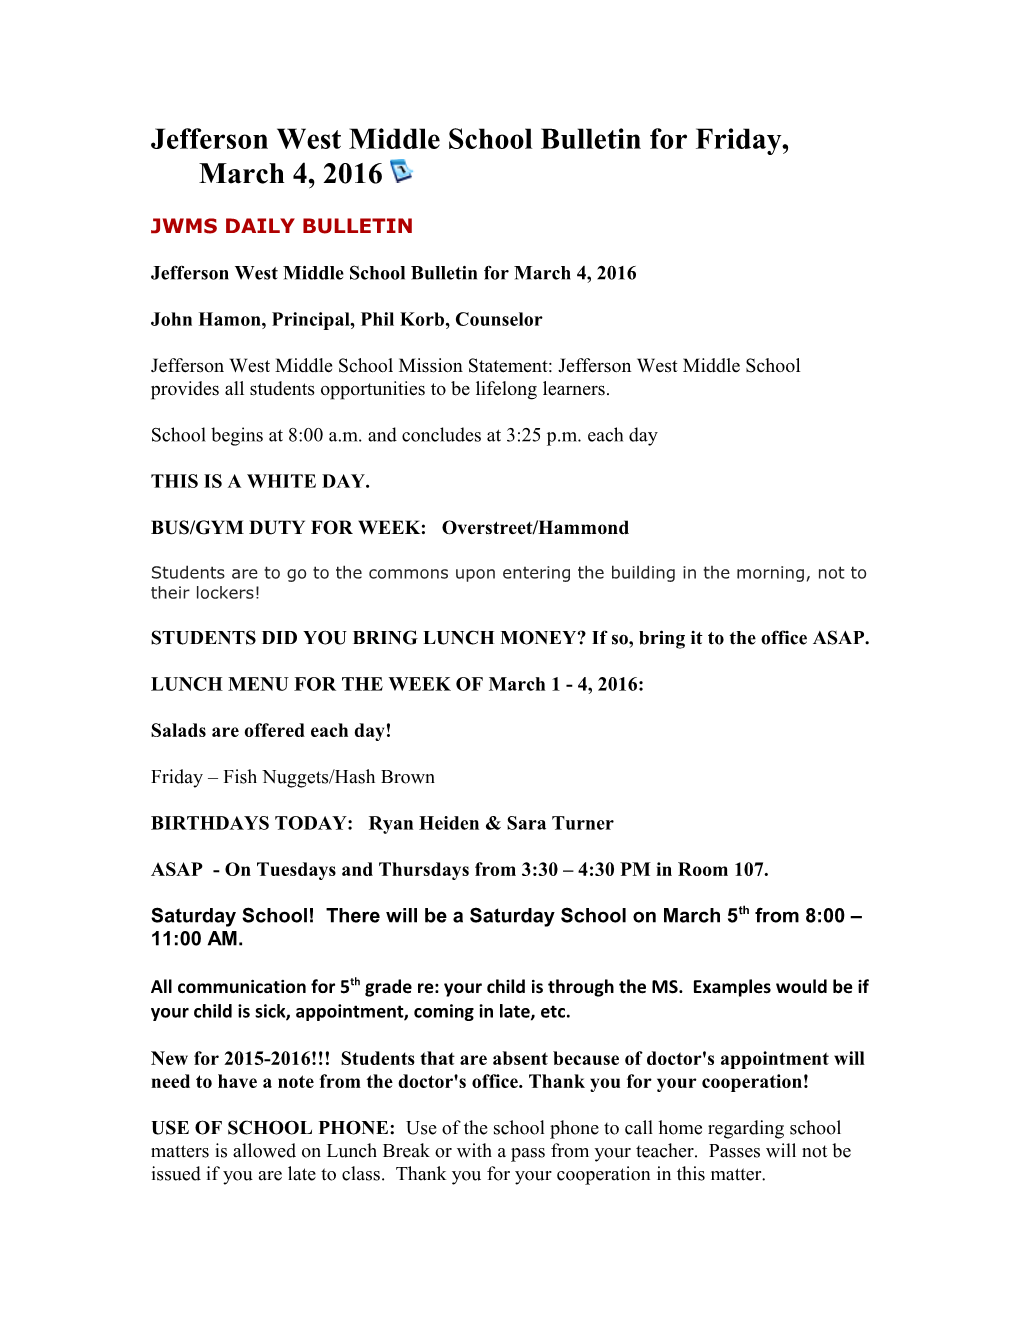 Jwms Daily Bulletin s1